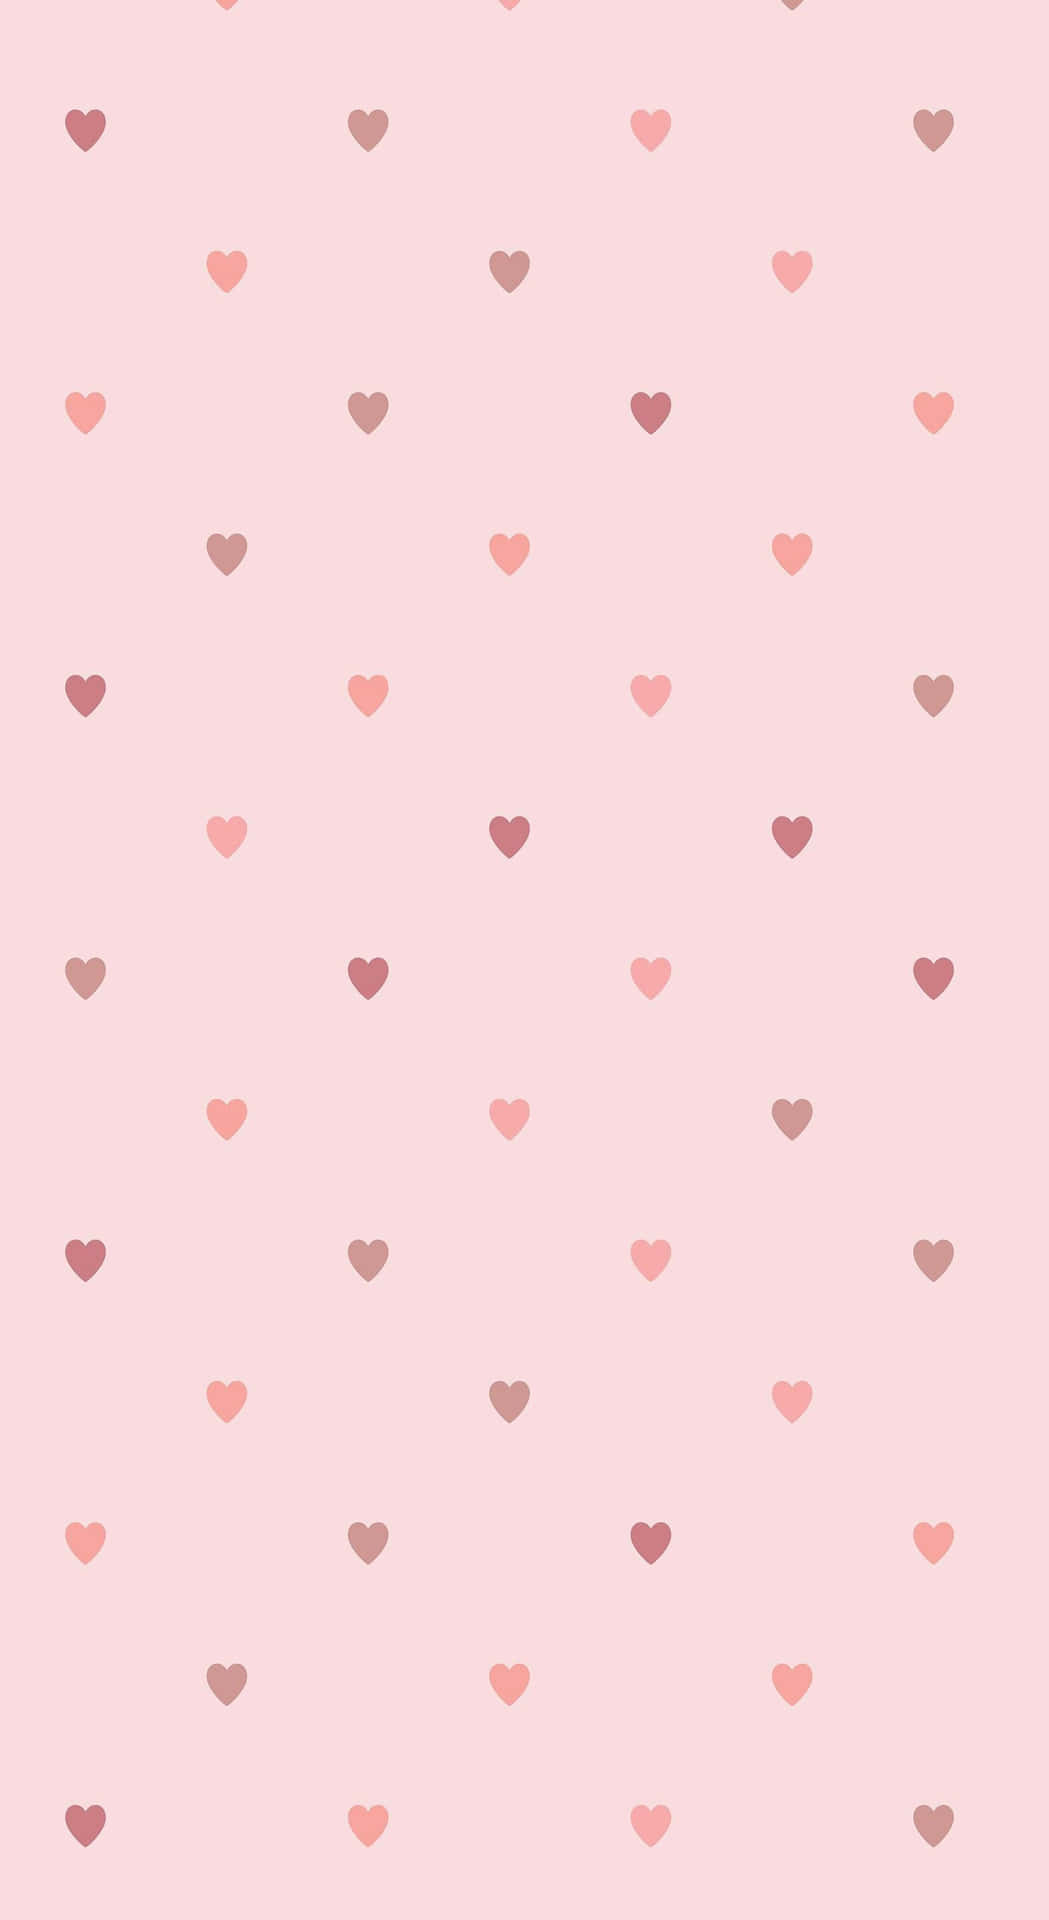 Show your love theme with Glitter Pink Hearts Wallpaper